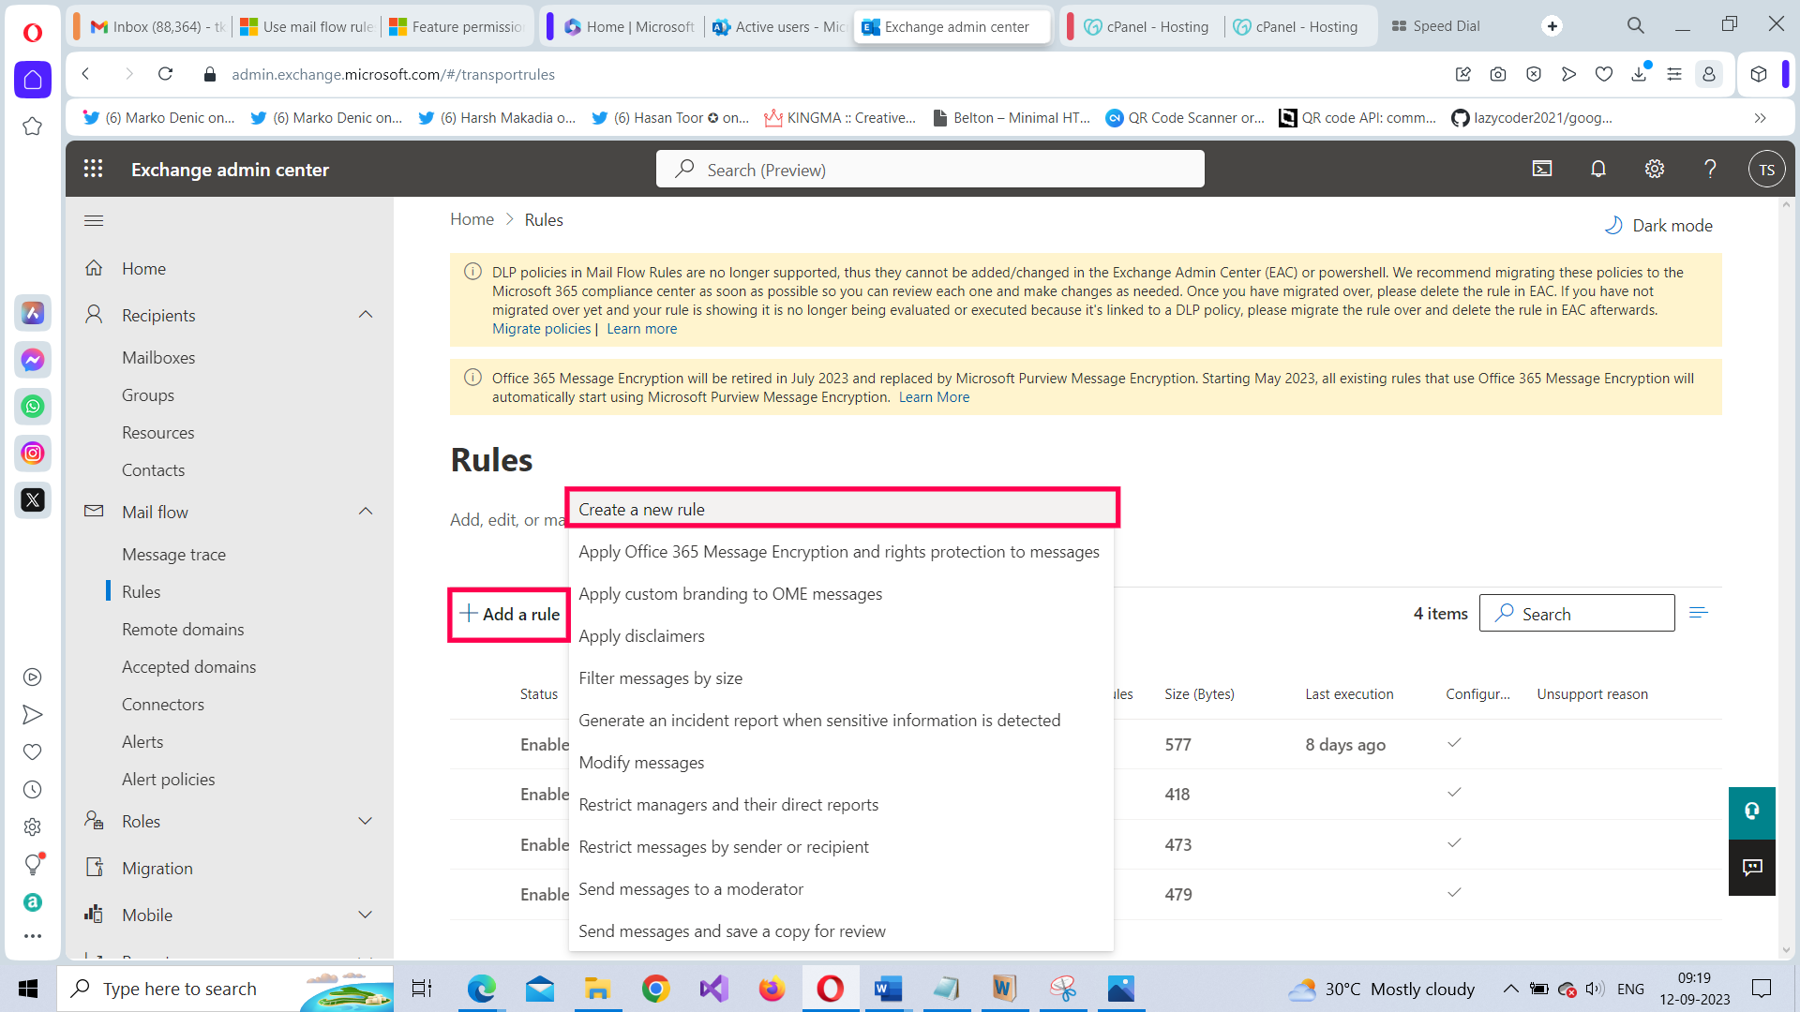 This screenshot shows how you can access the Microsoft 365 mail flow rule feature in the Microsoft 365 Exchange admin center. The Add a rule option and the create a new rule dropdown are both selected.